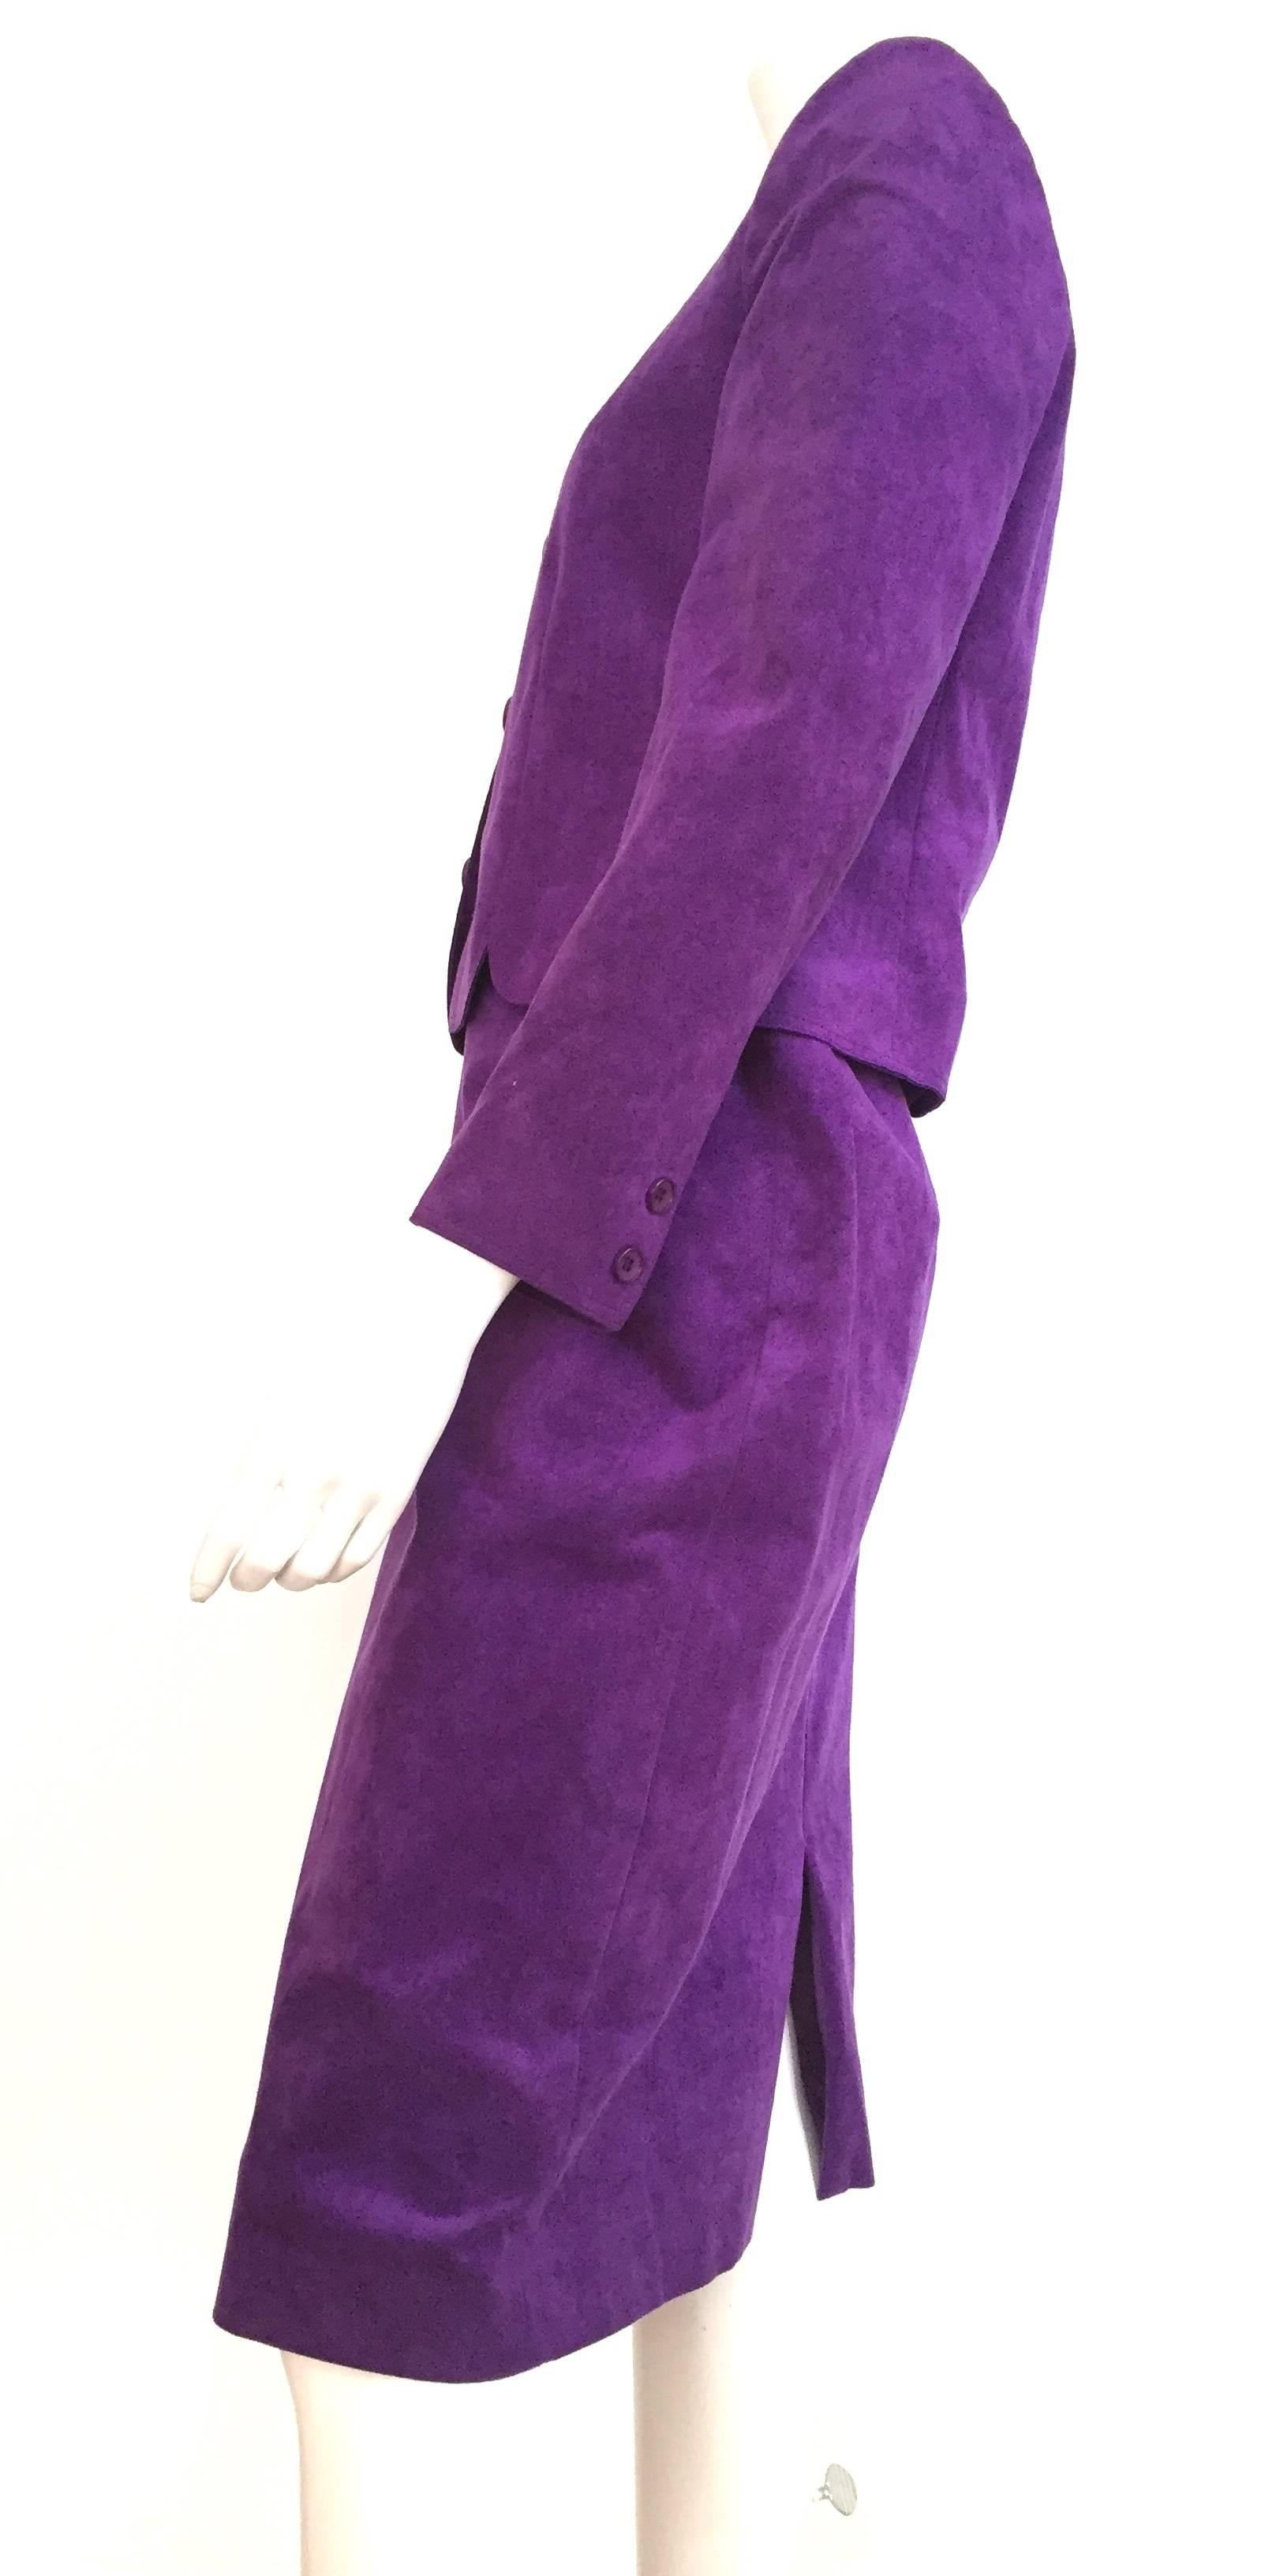 Lilli Ann 1970s Violet Ultra Suede Skirt Suit Size 6   In Excellent Condition For Sale In Atlanta, GA